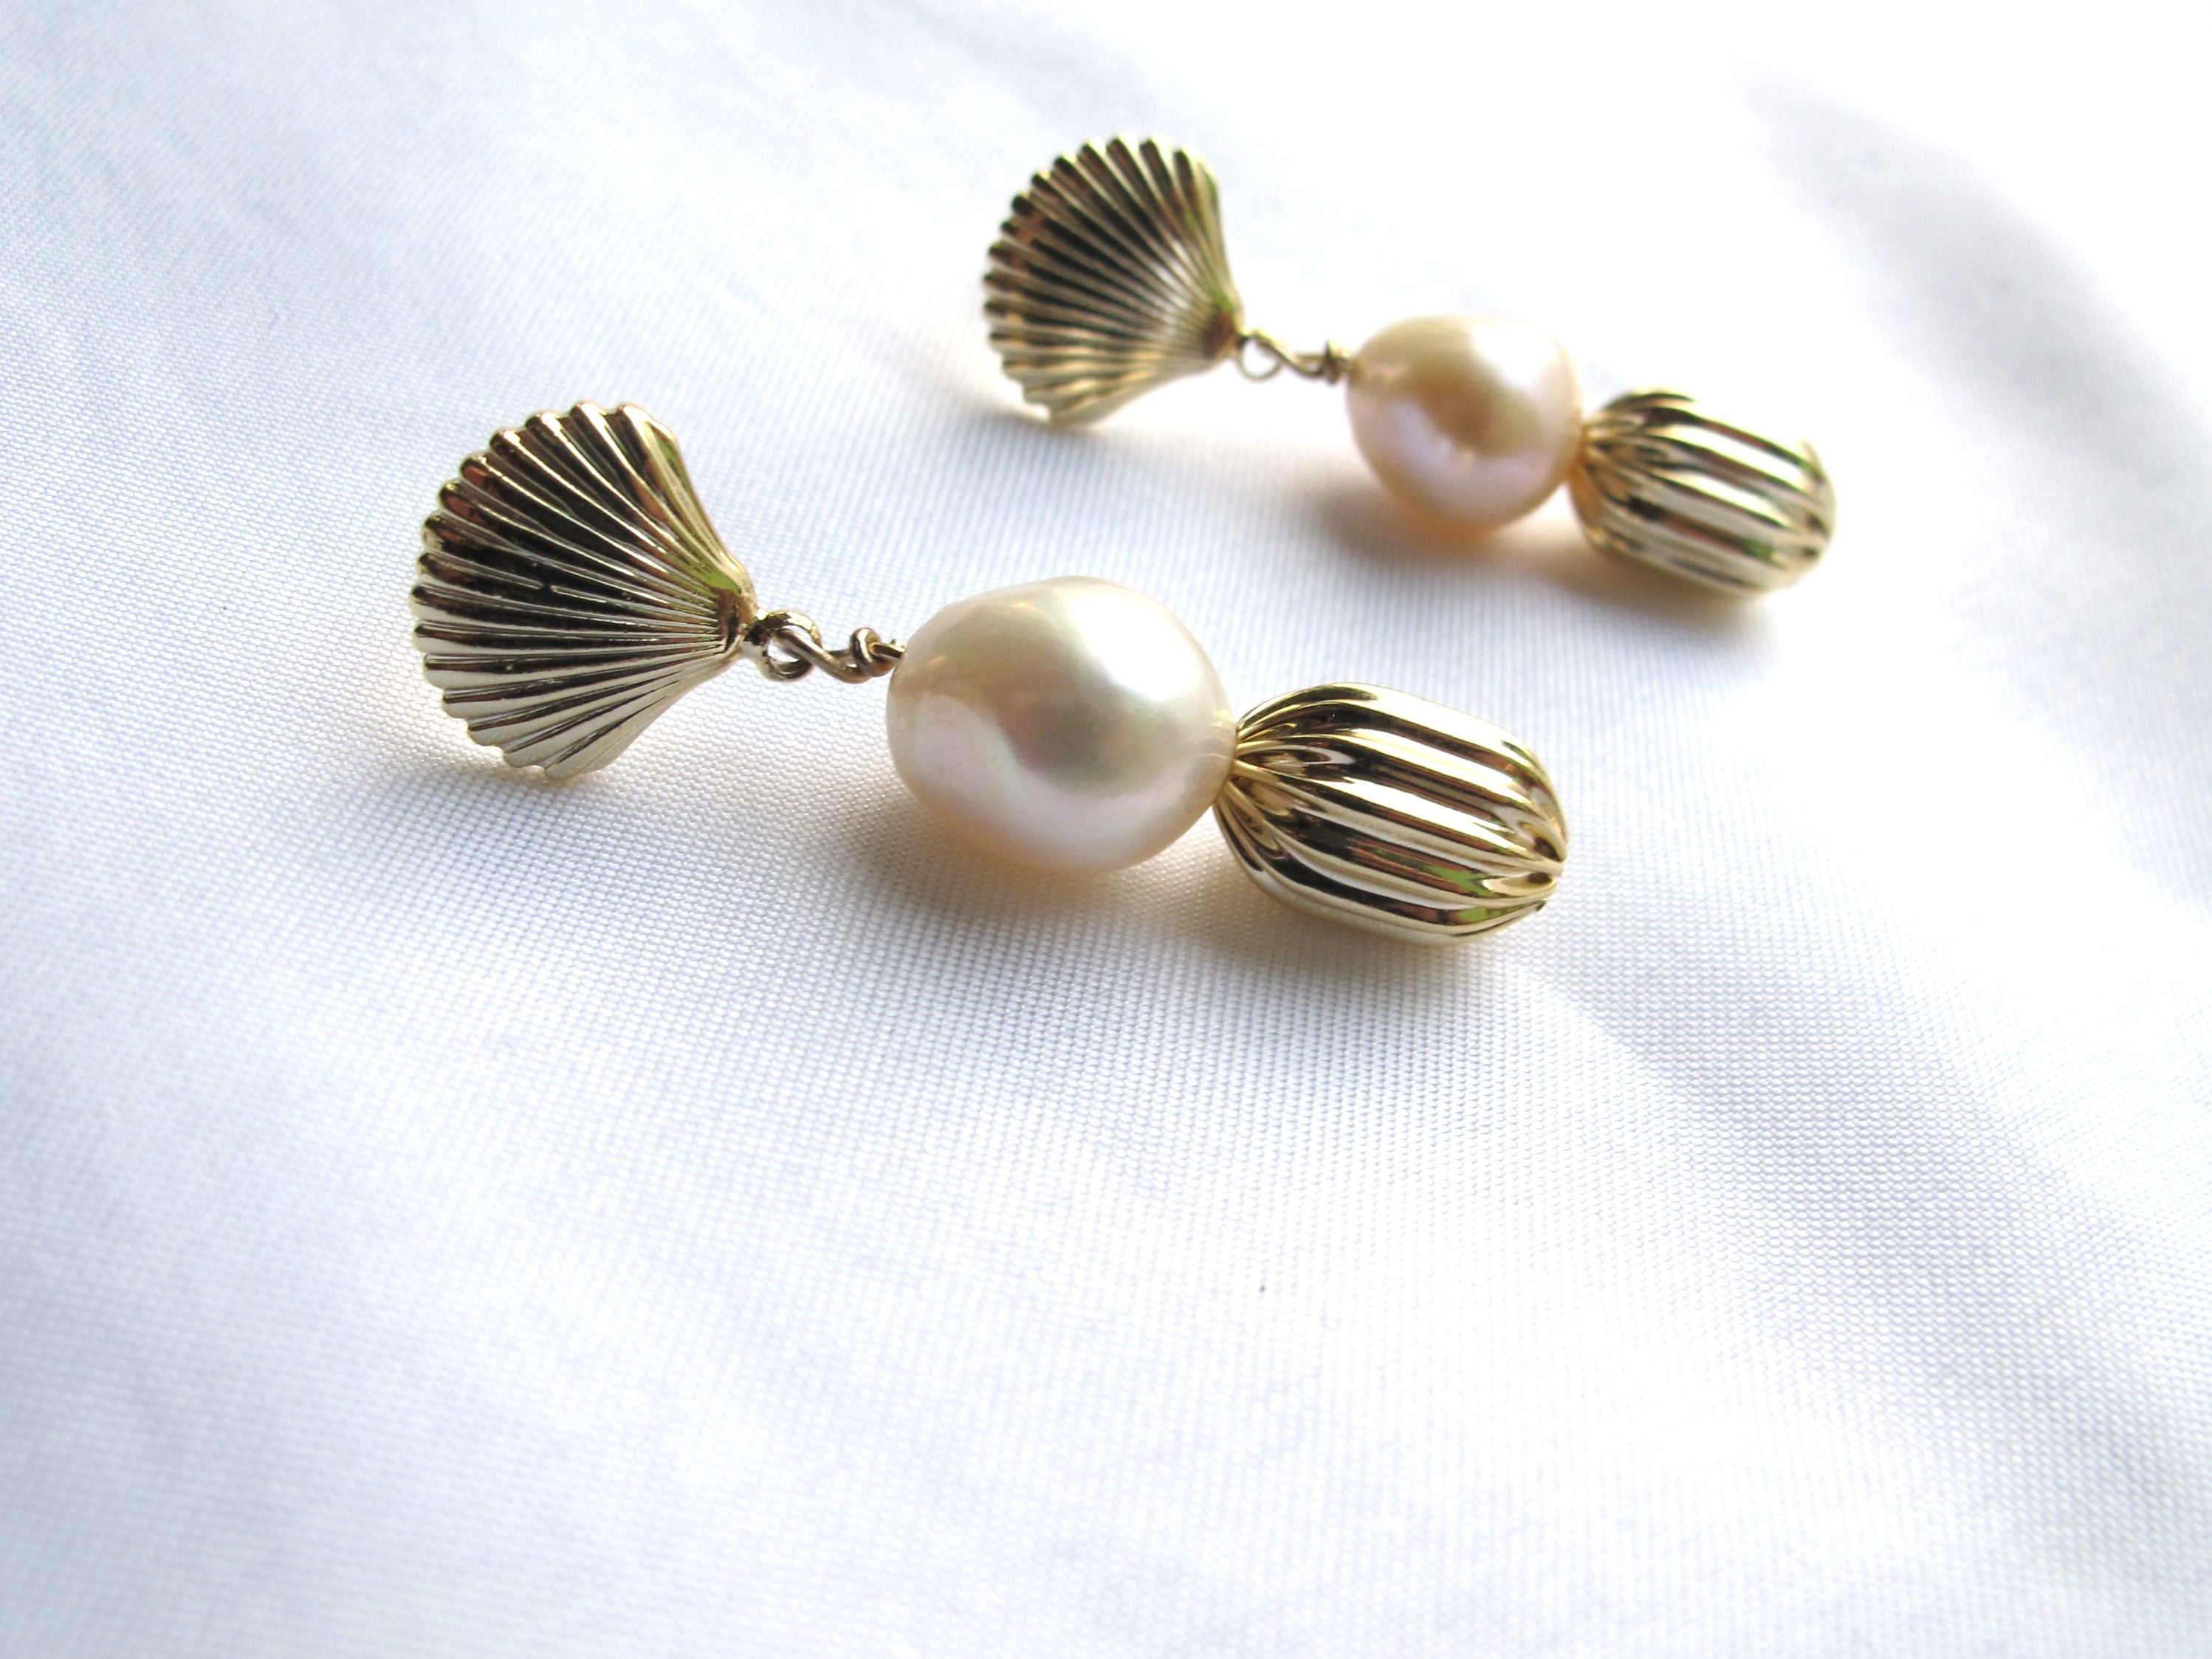 14K gold with fresh water pearl earrings – Mosul